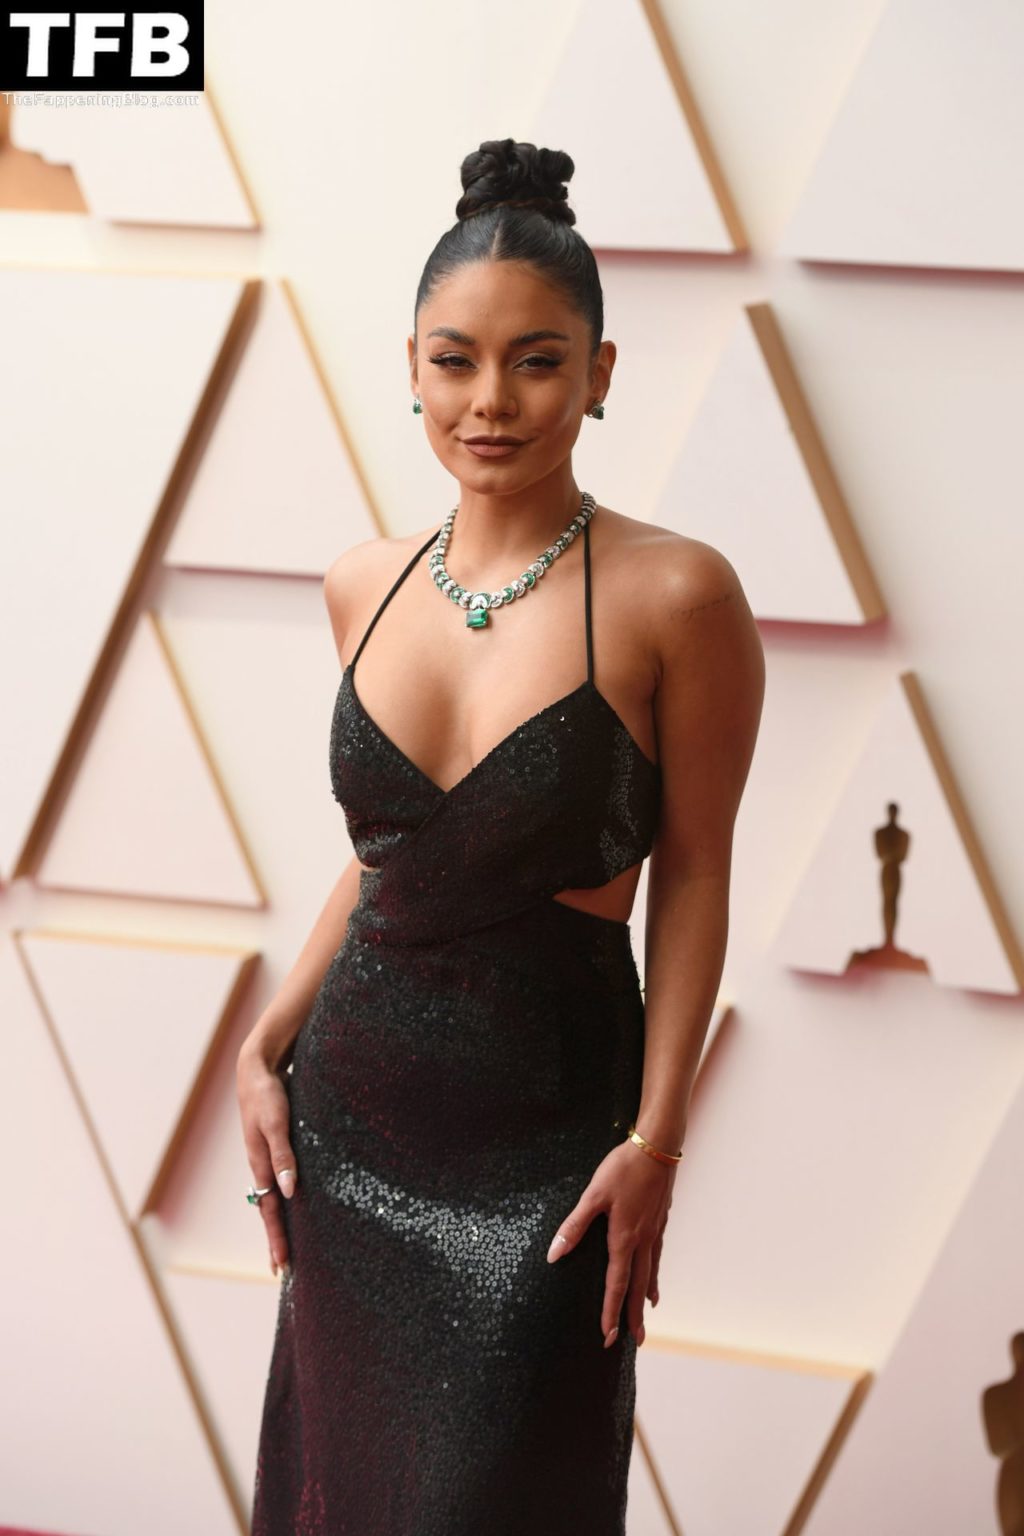 Vanessa Hudgens Sexy The Fappening Blog 16 4 1024x1536 - Vanessa Hudgens Poses on the Red Carpet at the 94th Annual Academy Awards (83 Photos)